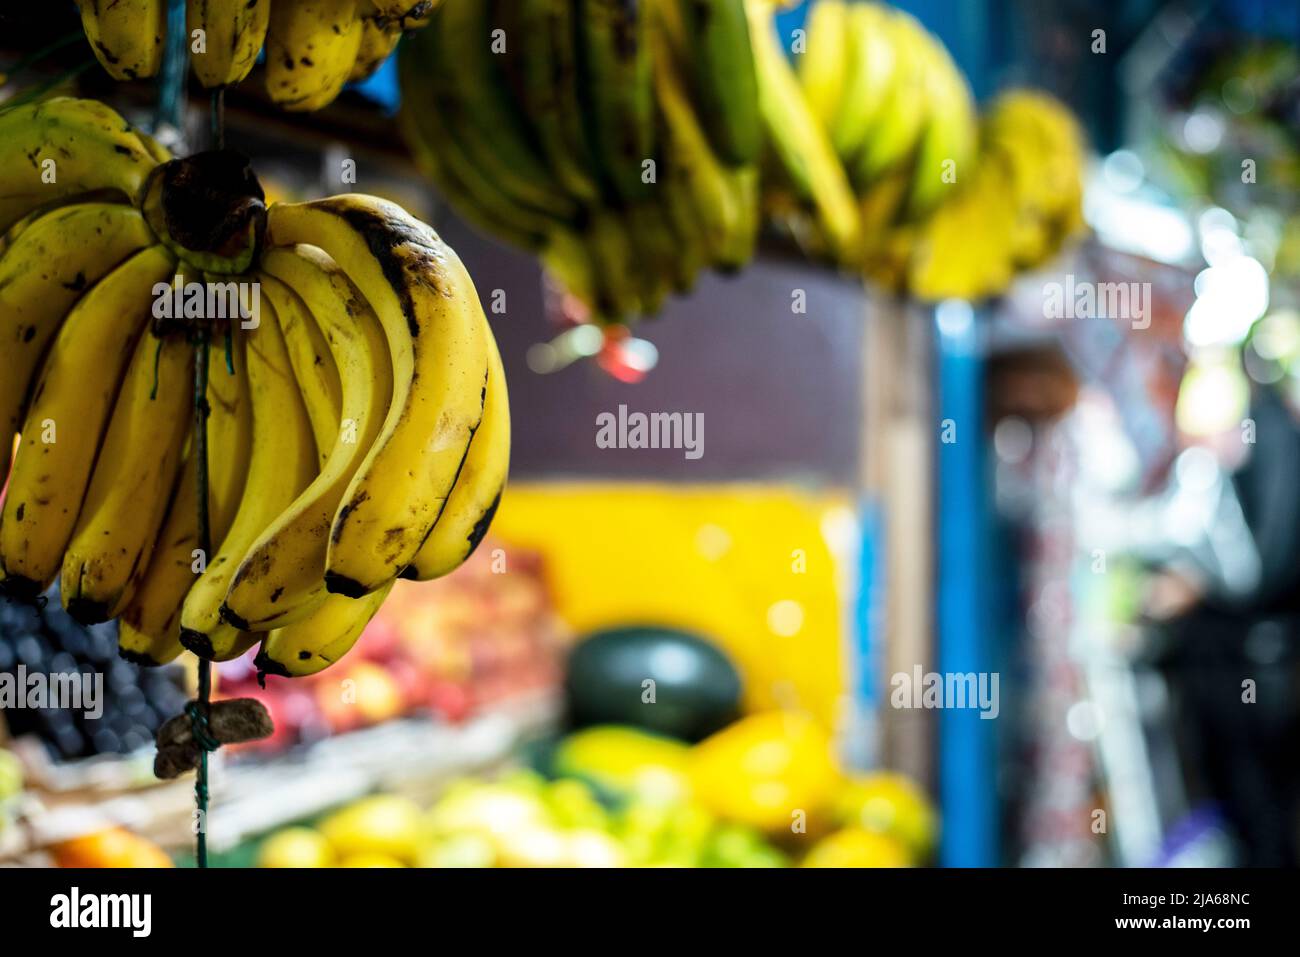 Green banana are hanging in a fruit shop Stock Photo